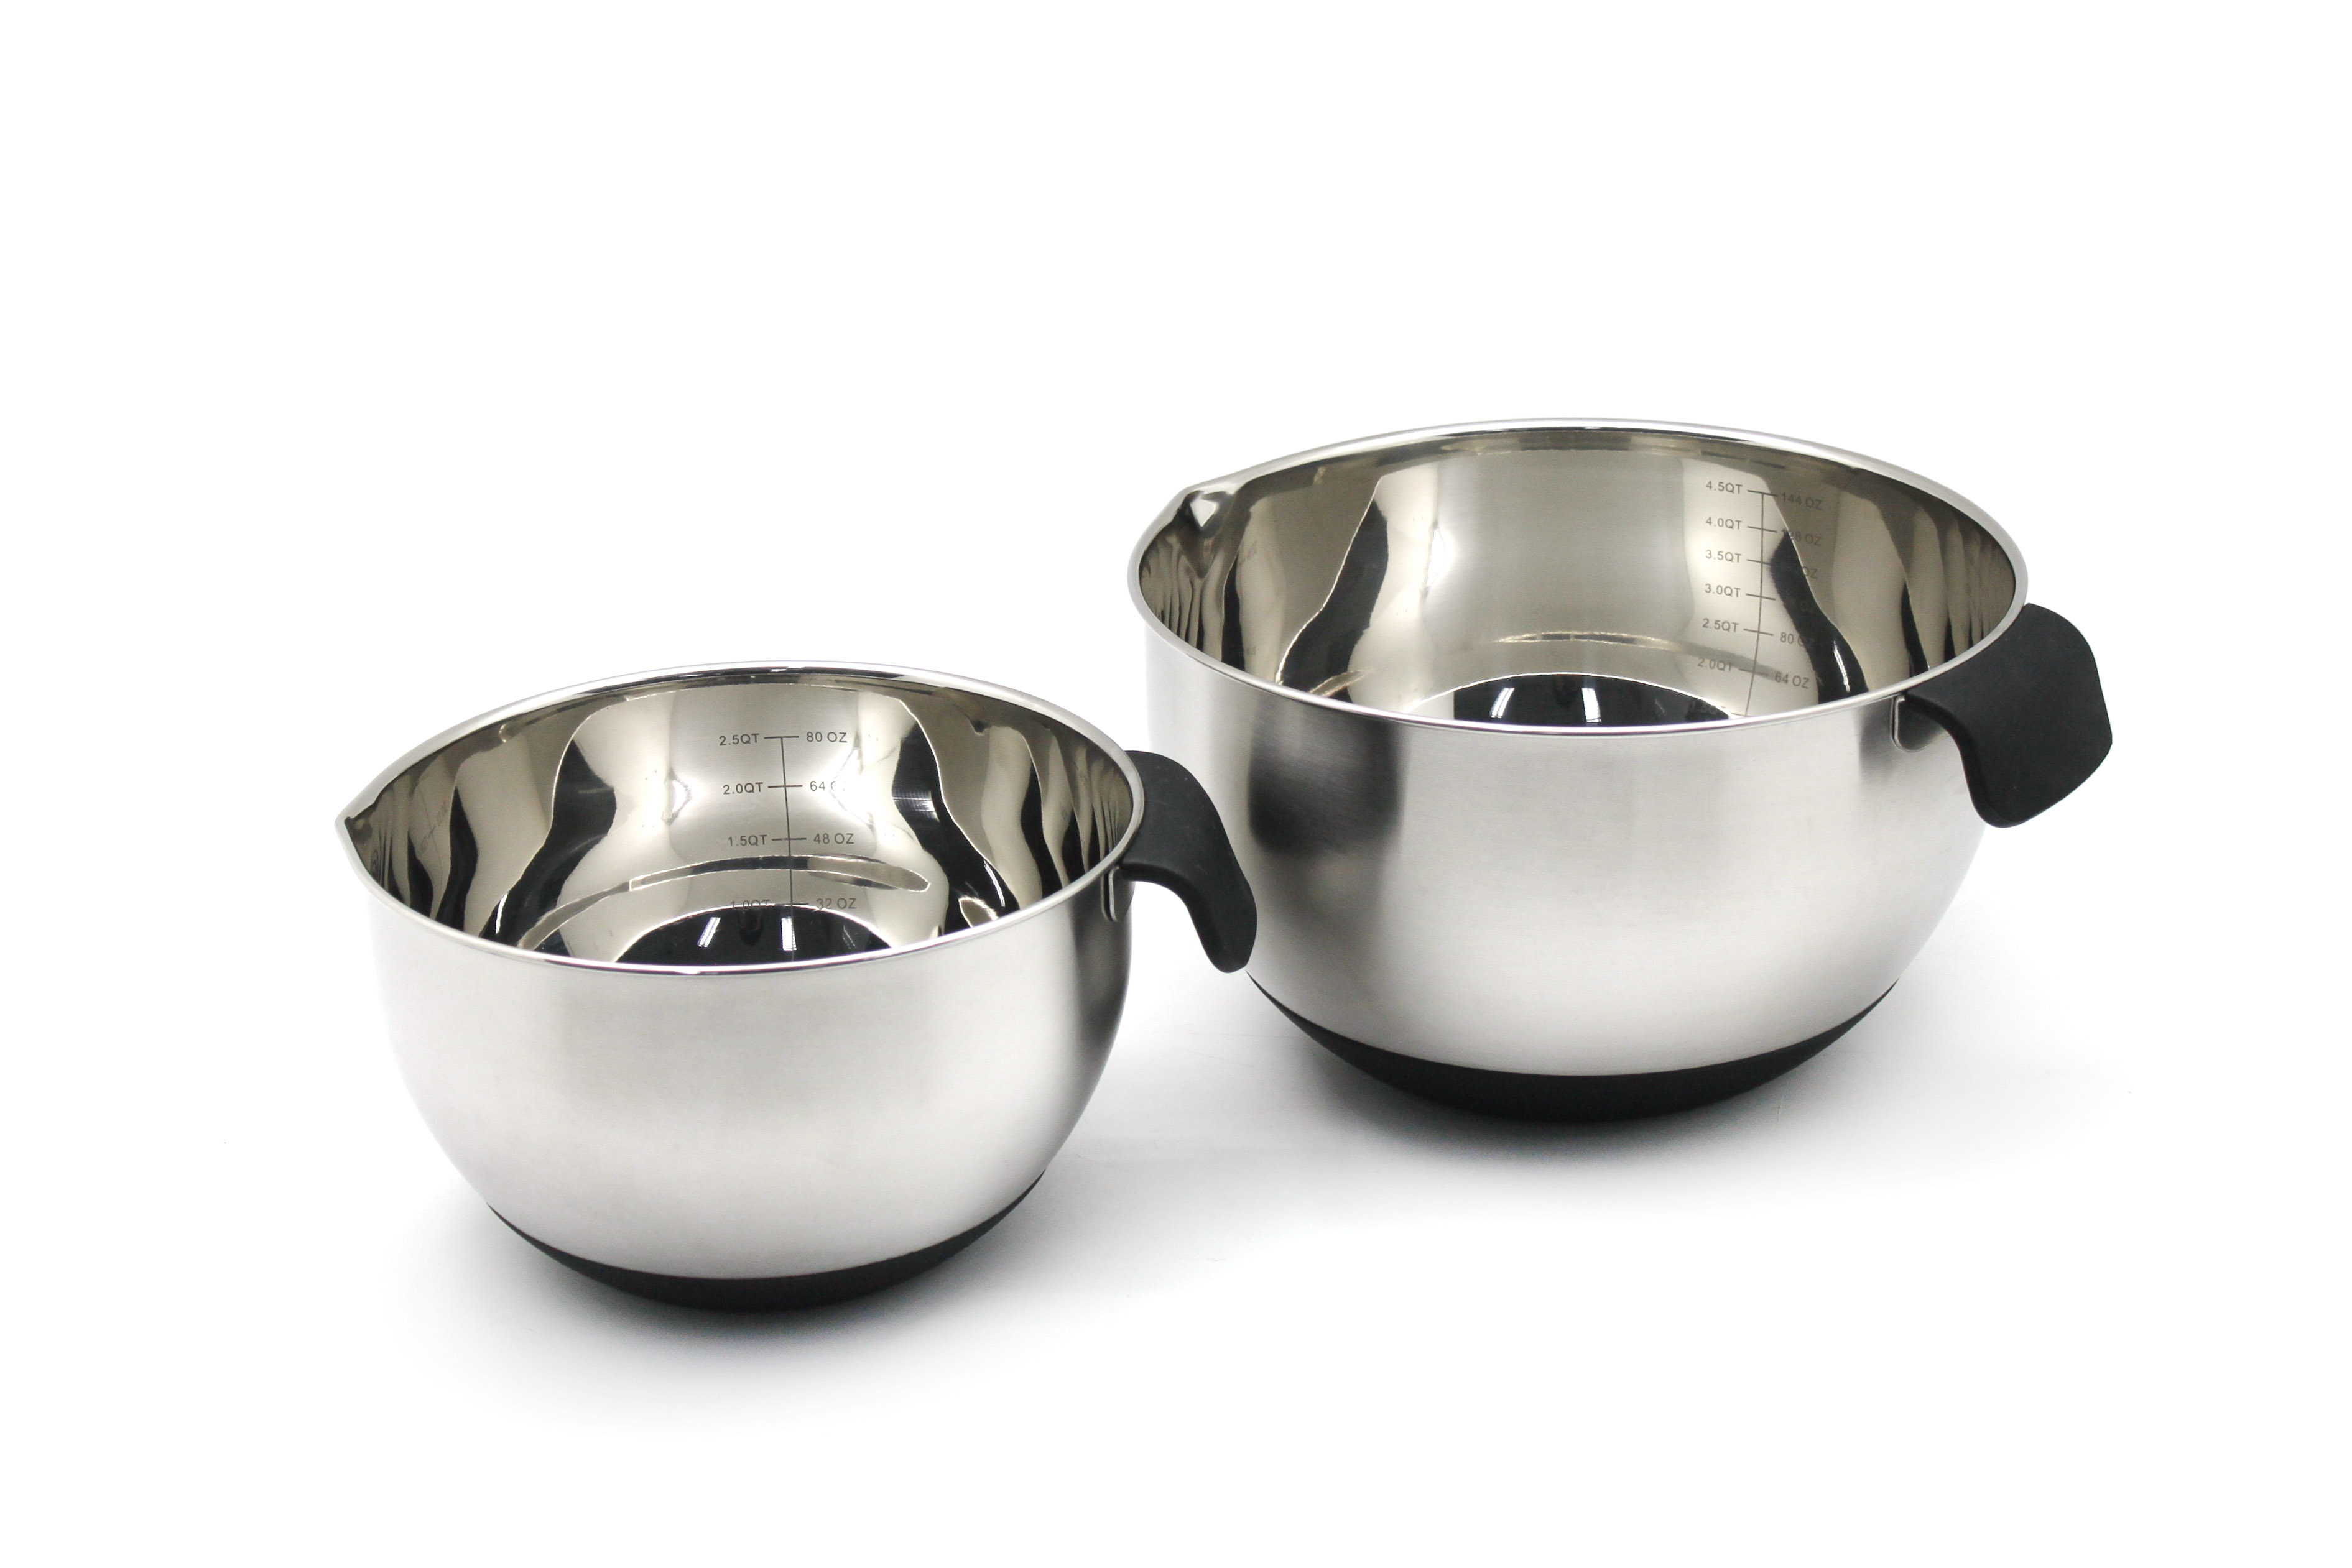 Stainless steel mixing bowl 32 oz